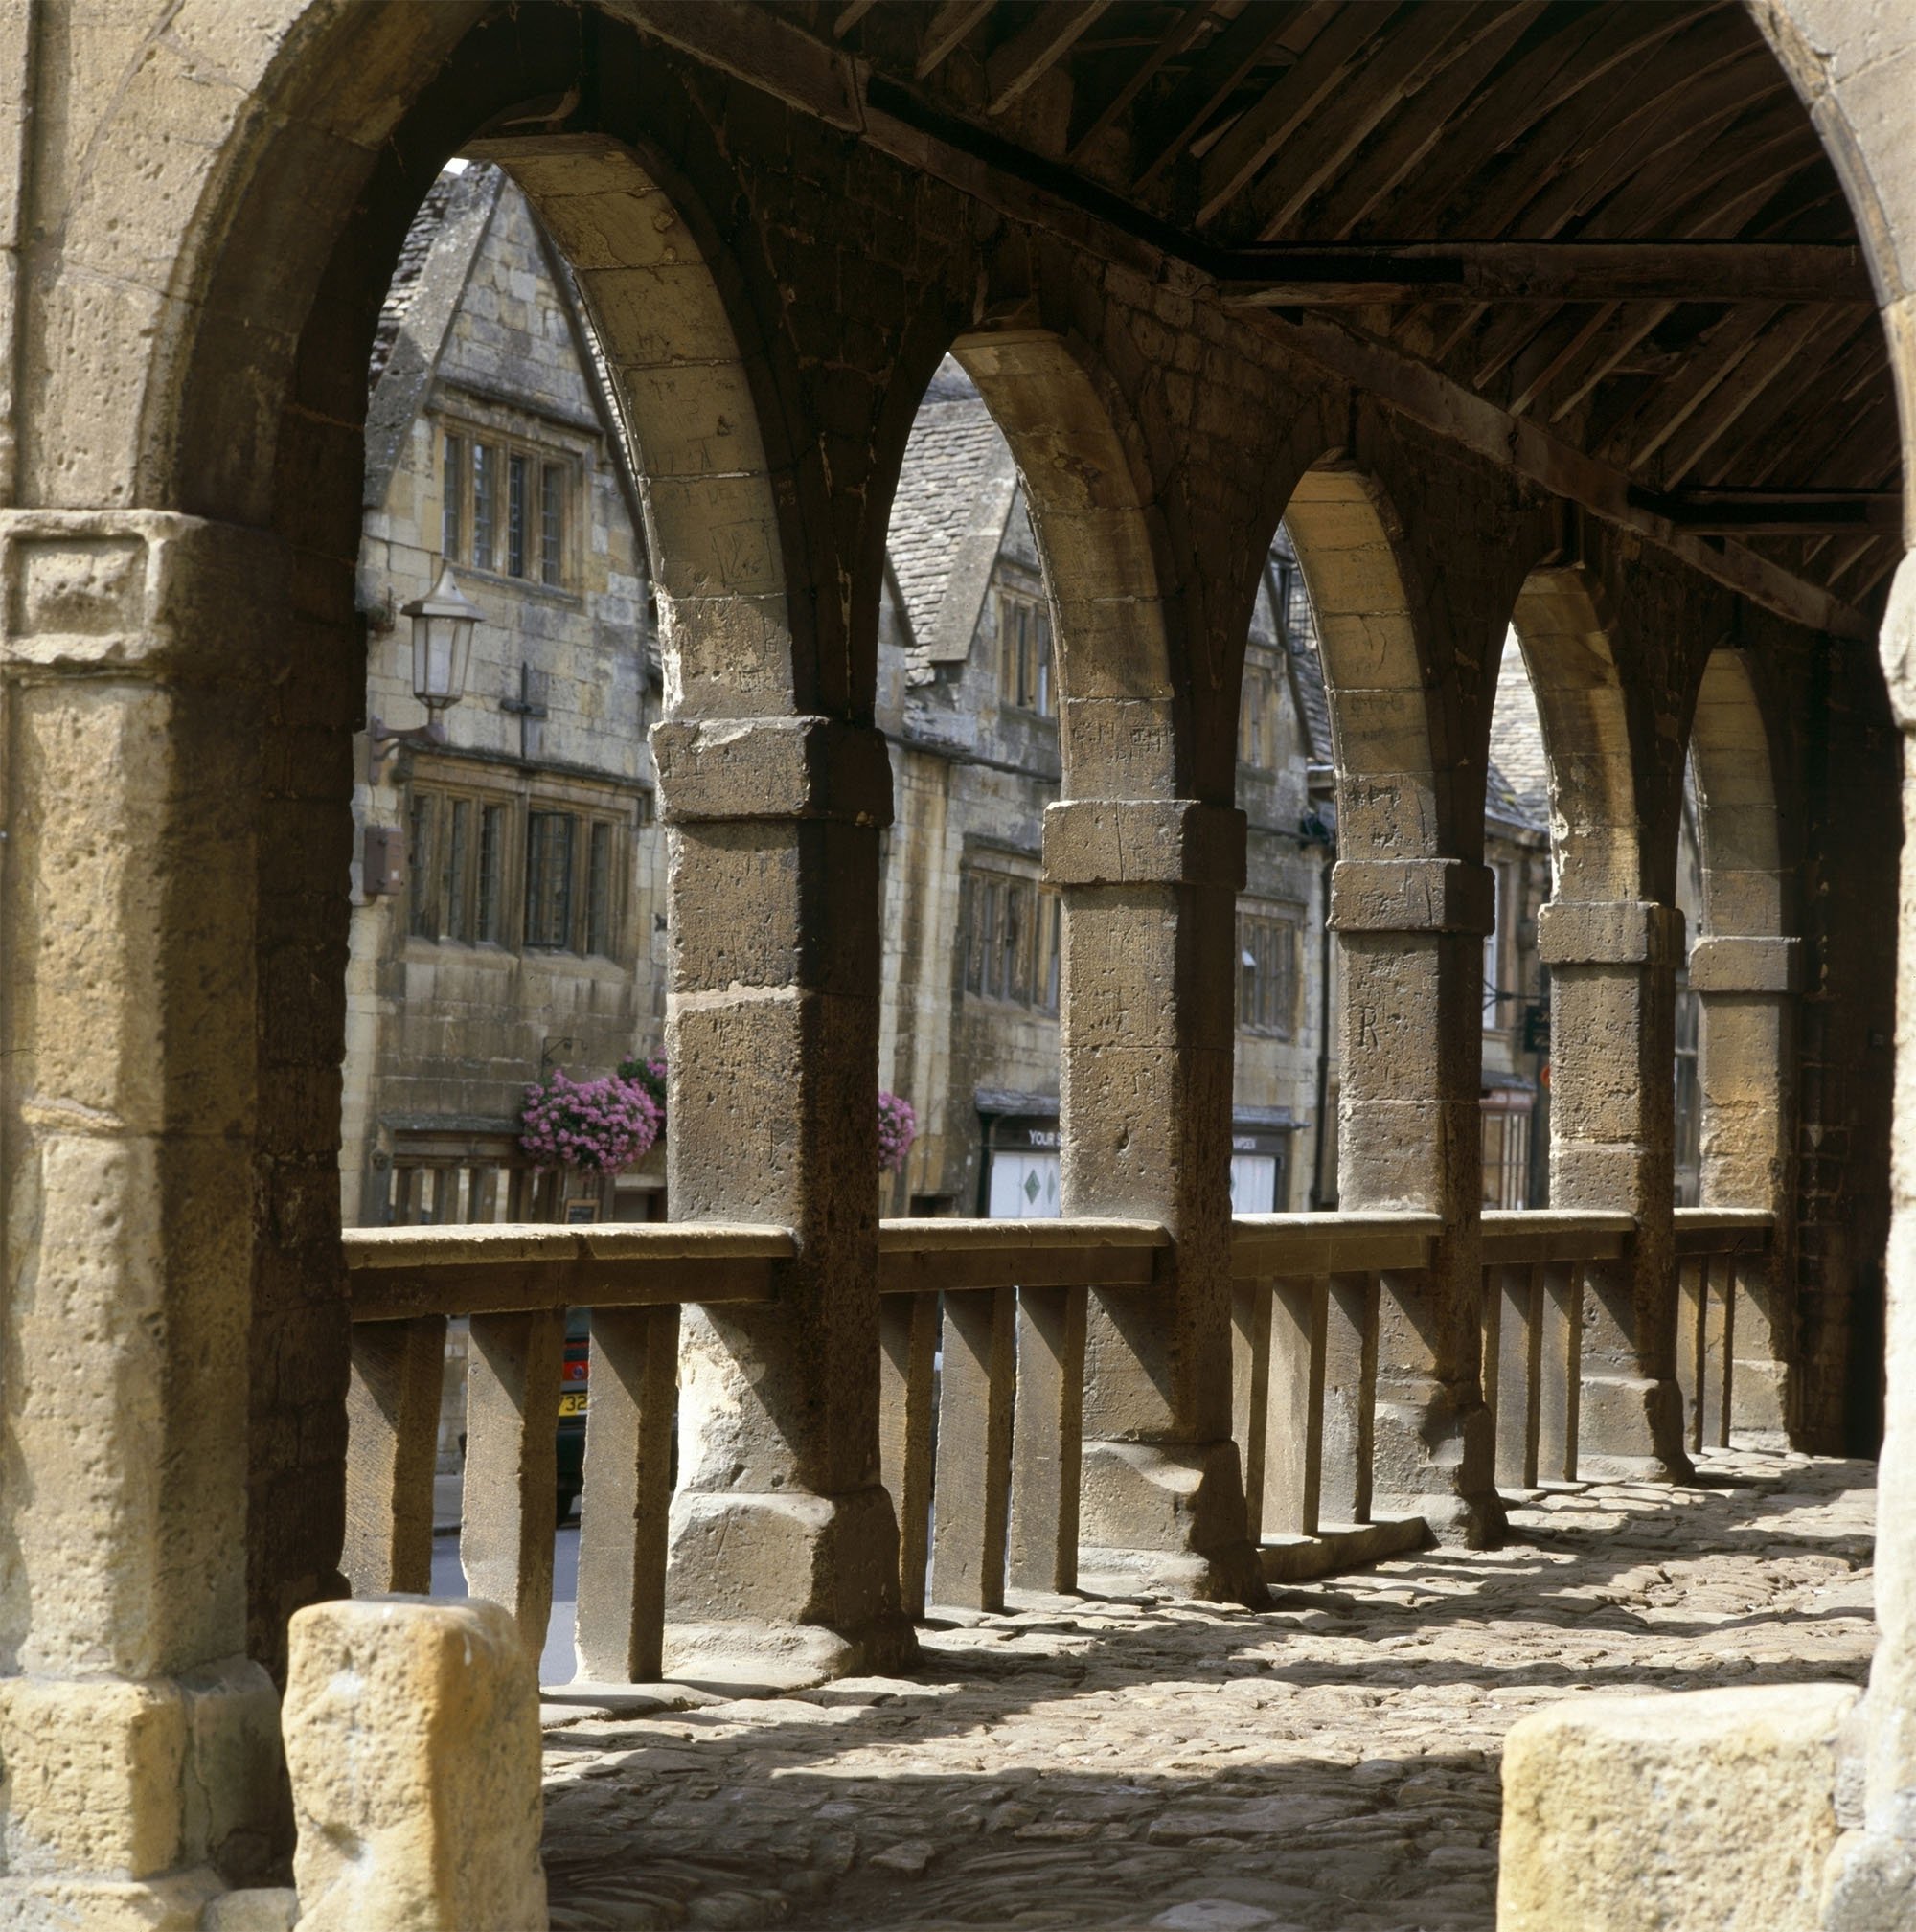 Market Hall, The Square, Chipping Campden,  Gloucestershire. Interior view showing arches.